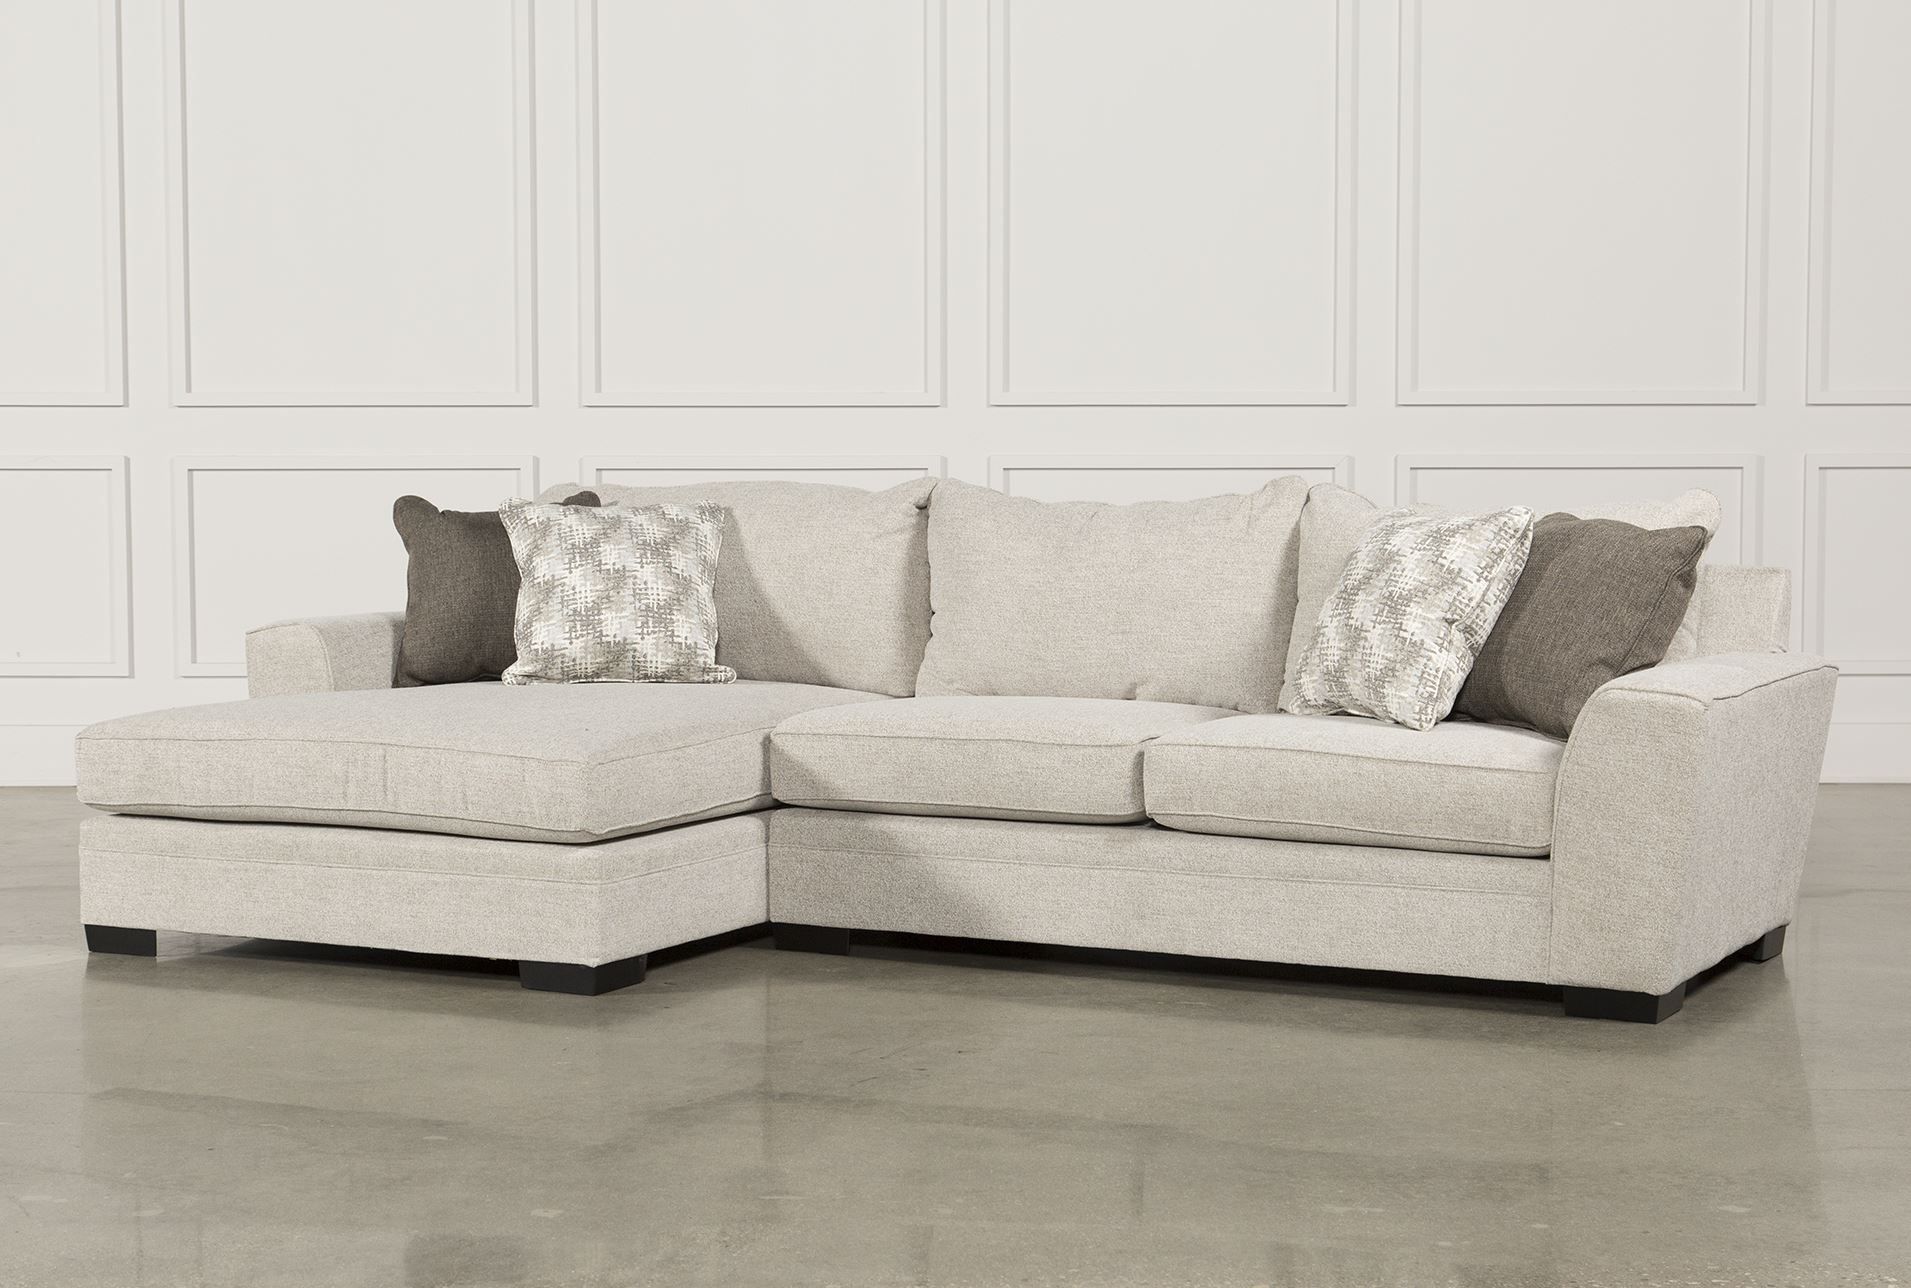 Delano 2 Piece Sectional W/laf Oversized Chaise | Living Room With Delano 2 Piece Sectionals With Laf Oversized Chaise (View 5 of 25)